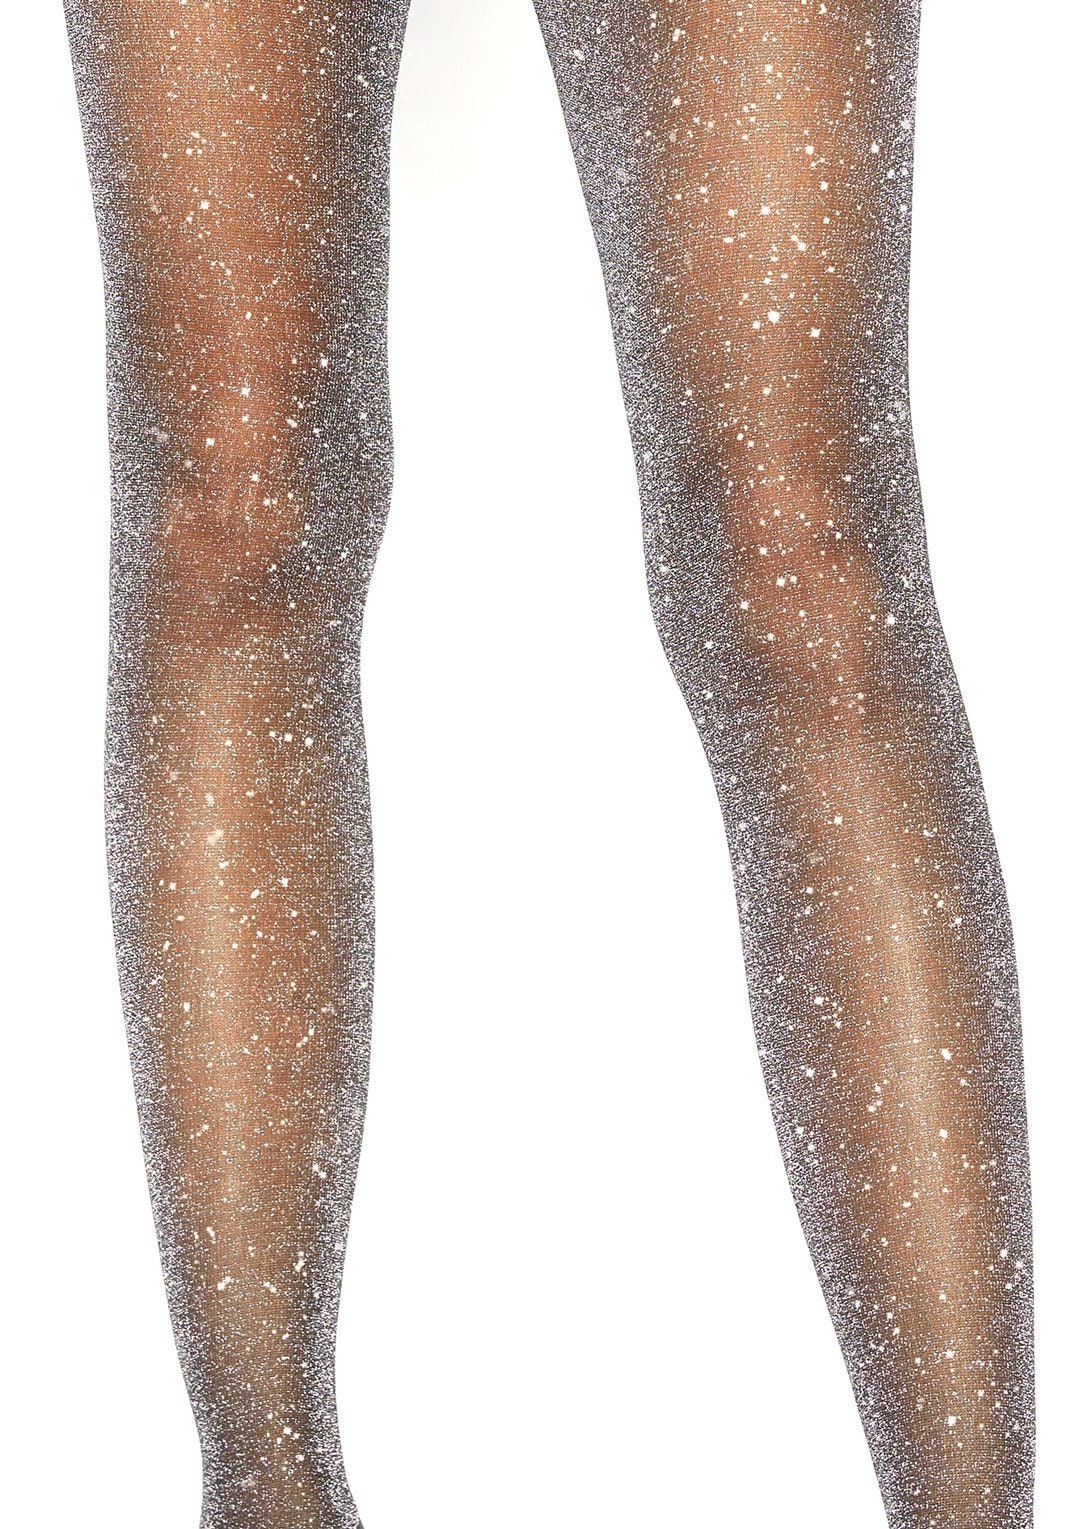 GLITTER SHIMMER TIGHTS, Black With Silver Sparkle, Panyhose Stockings -   Ireland